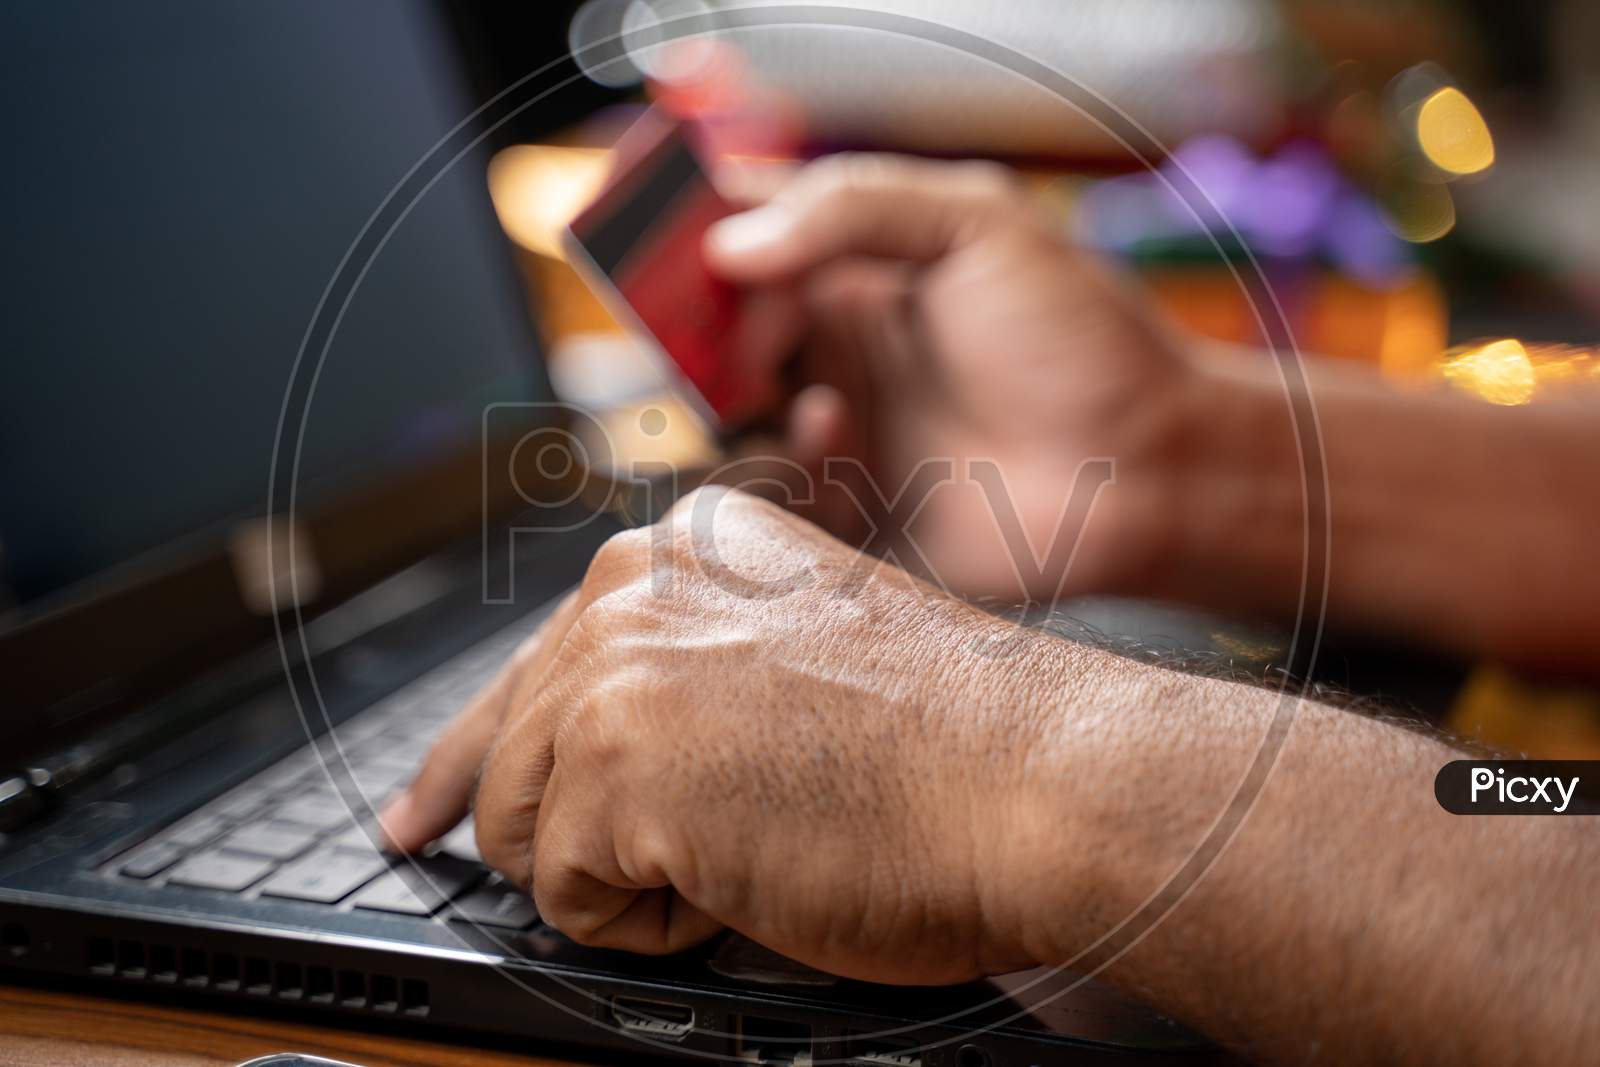 Close Up Of Old Man Hands Busy In Purchasing Or Doing Online Payment On Laptop During Holiday Seasonal Sale - Concept Of Senior People Using Ecommerce, Technology And Internet For Shopping On Laptop.